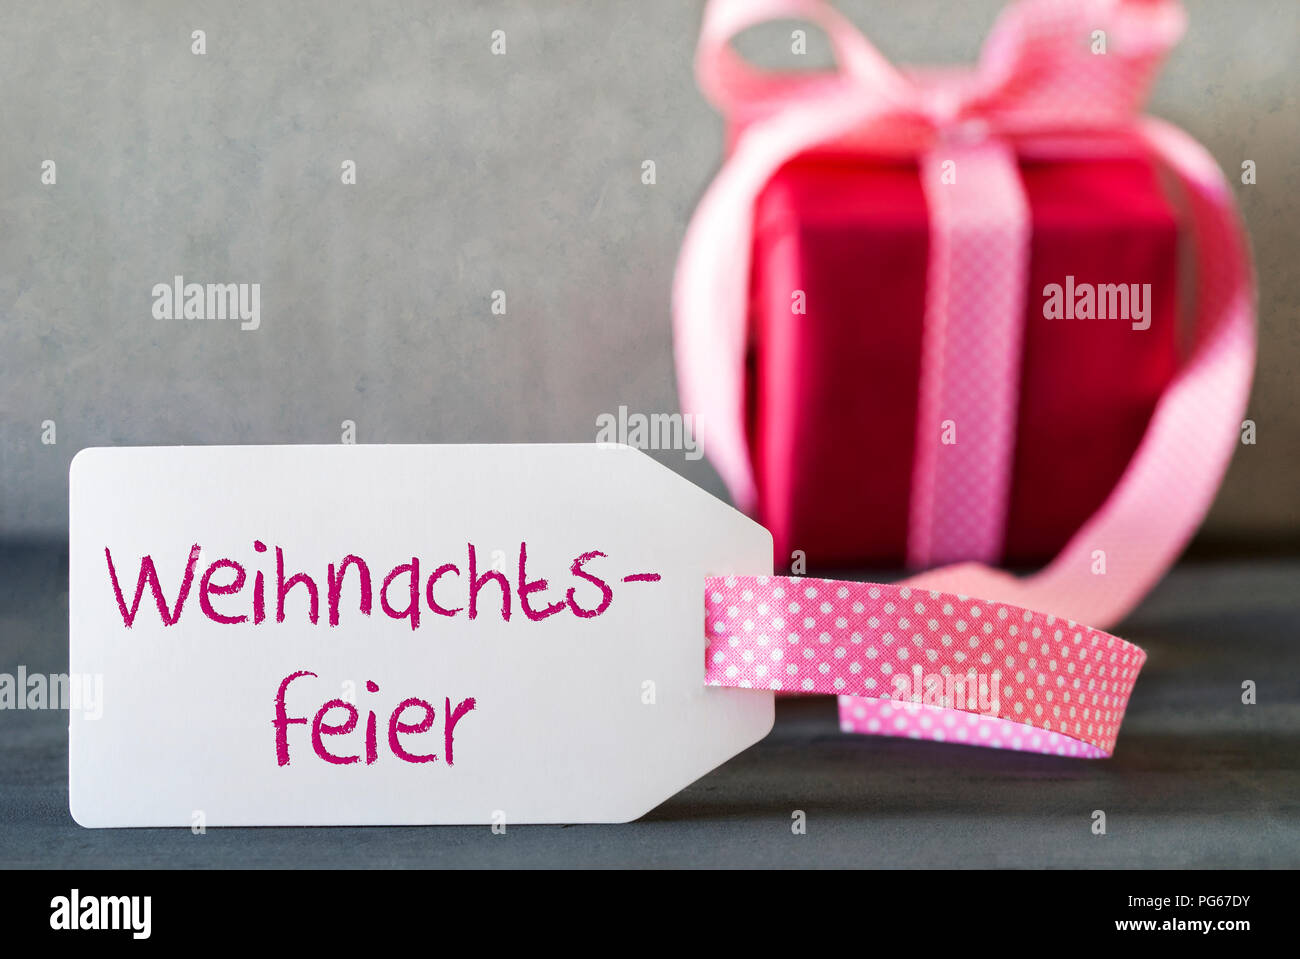 Pink Gift, Label, Weihnachtsfeier Means Christmas Party Stock Photo